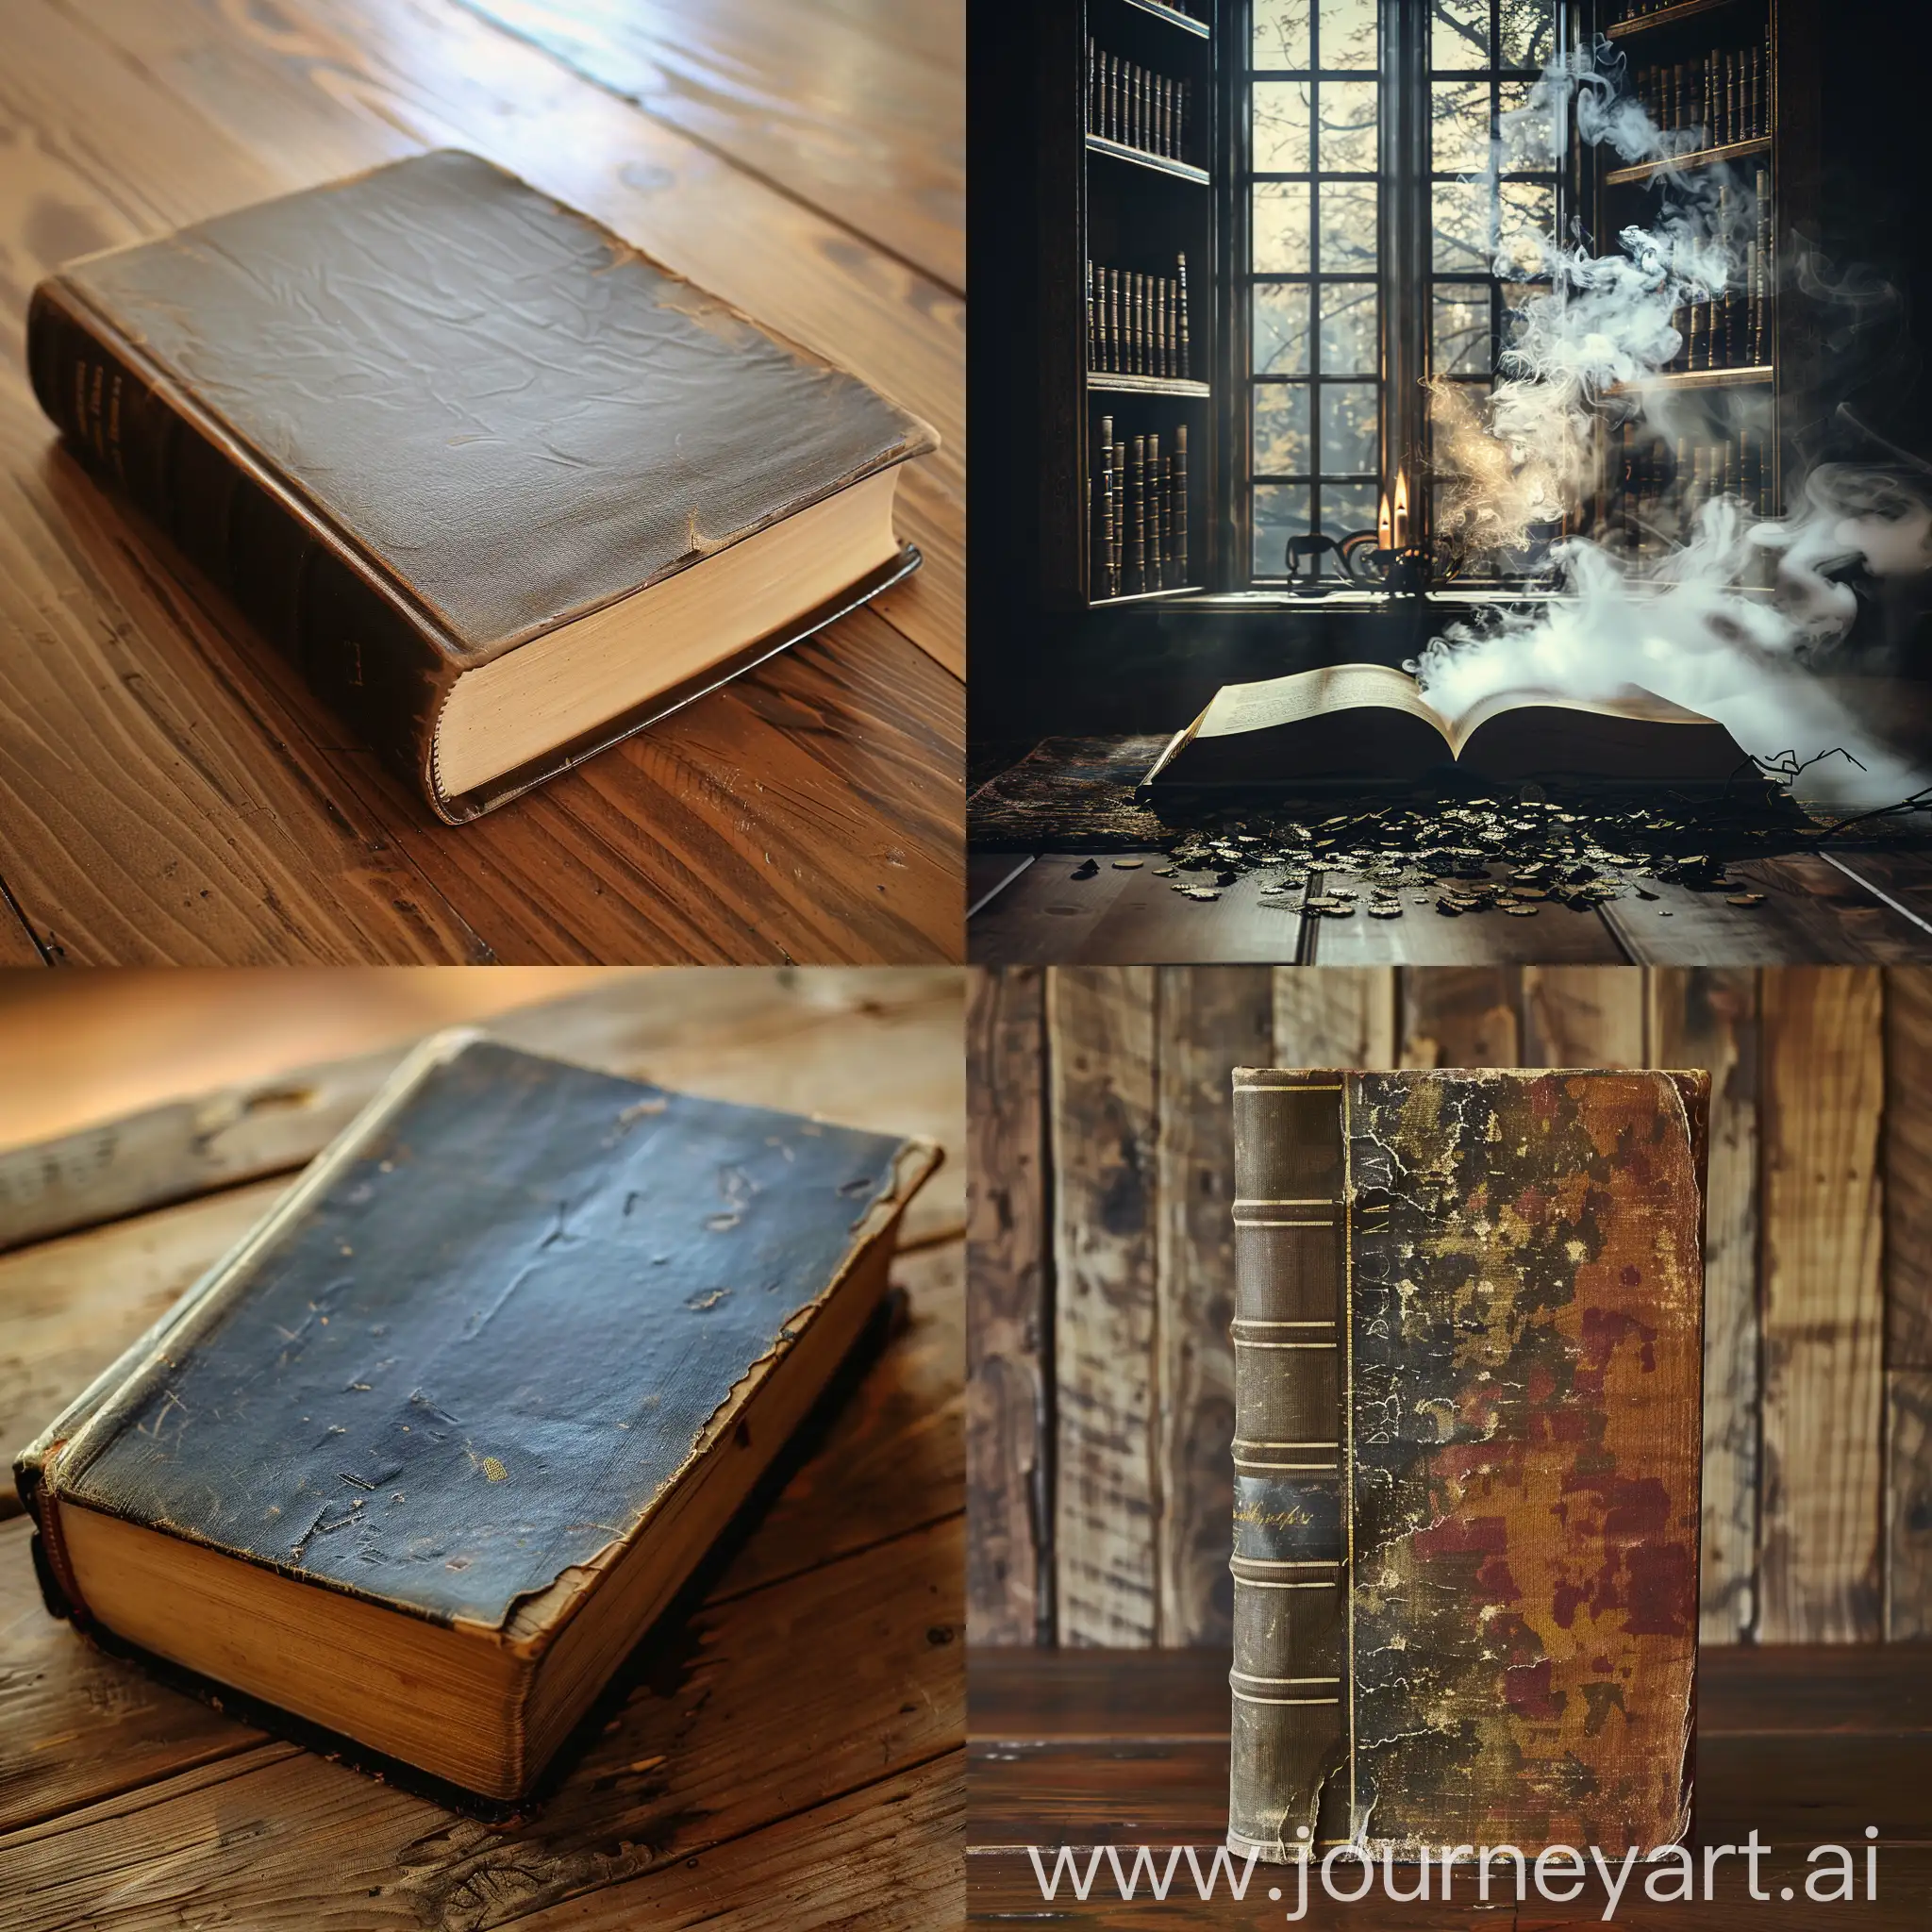 Vintage-Book-with-Ornate-Cover-and-Dusty-Pages-on-Wooden-Table